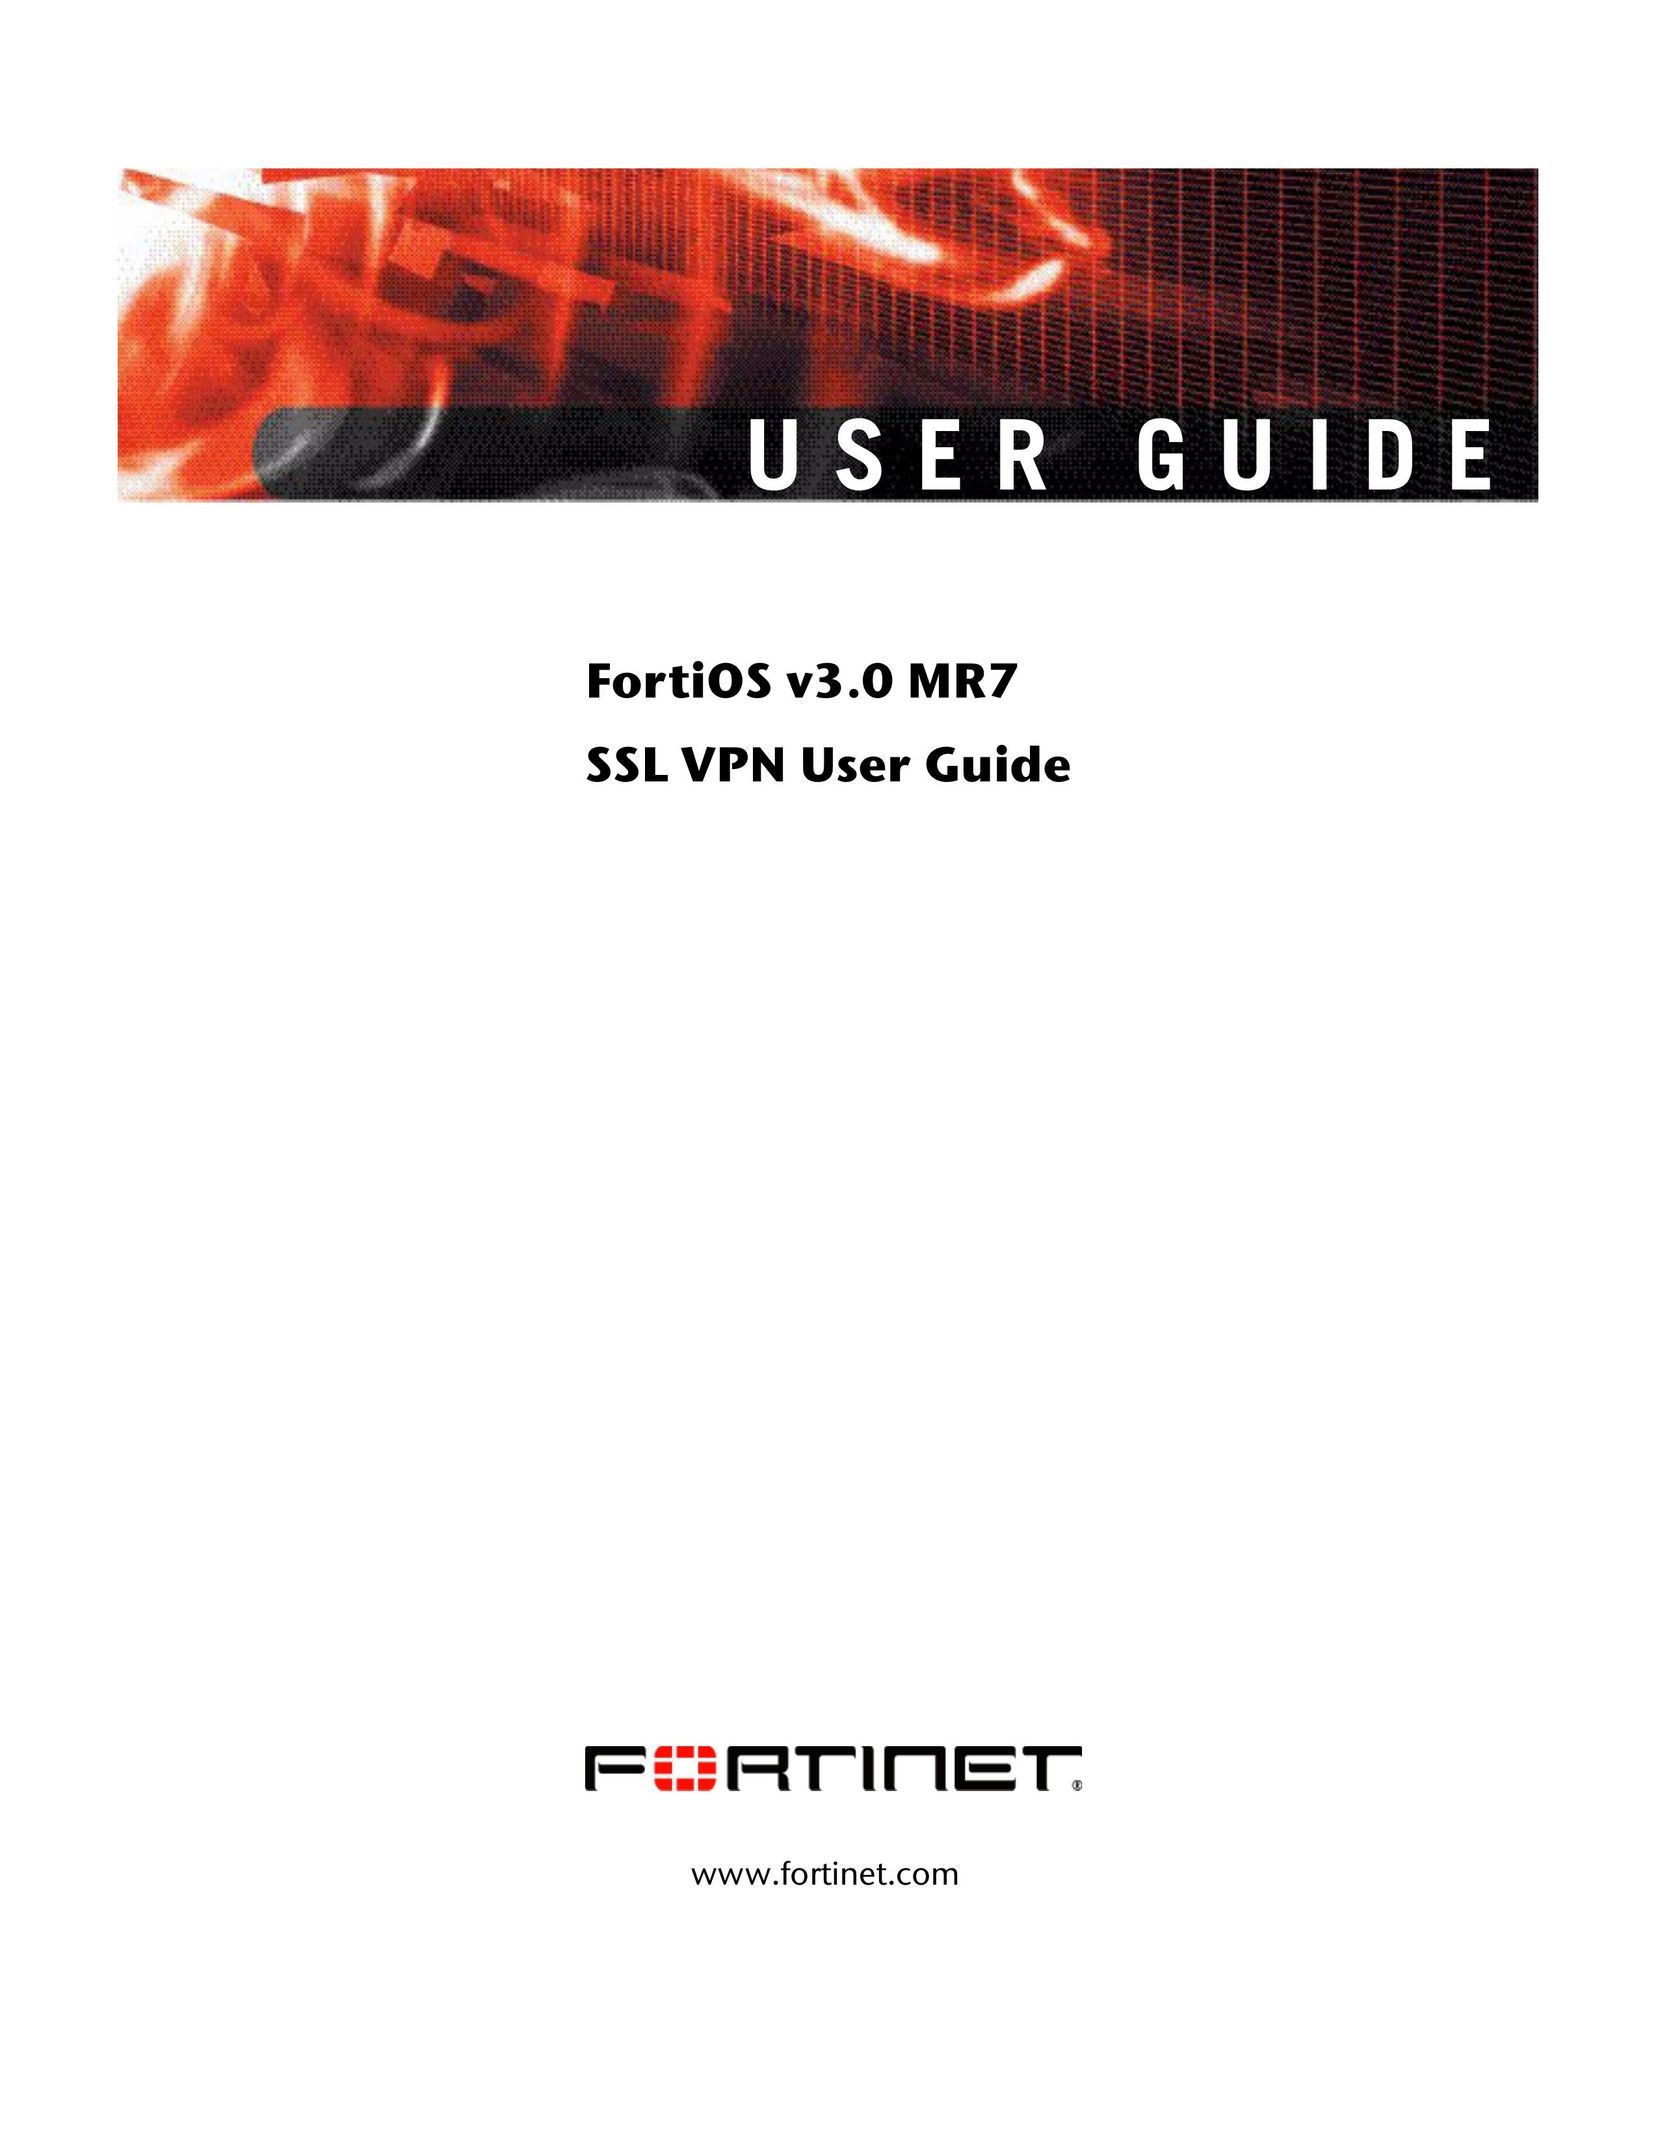 Fortinet FORTIOS V3.0 MR7 Network Router User Manual